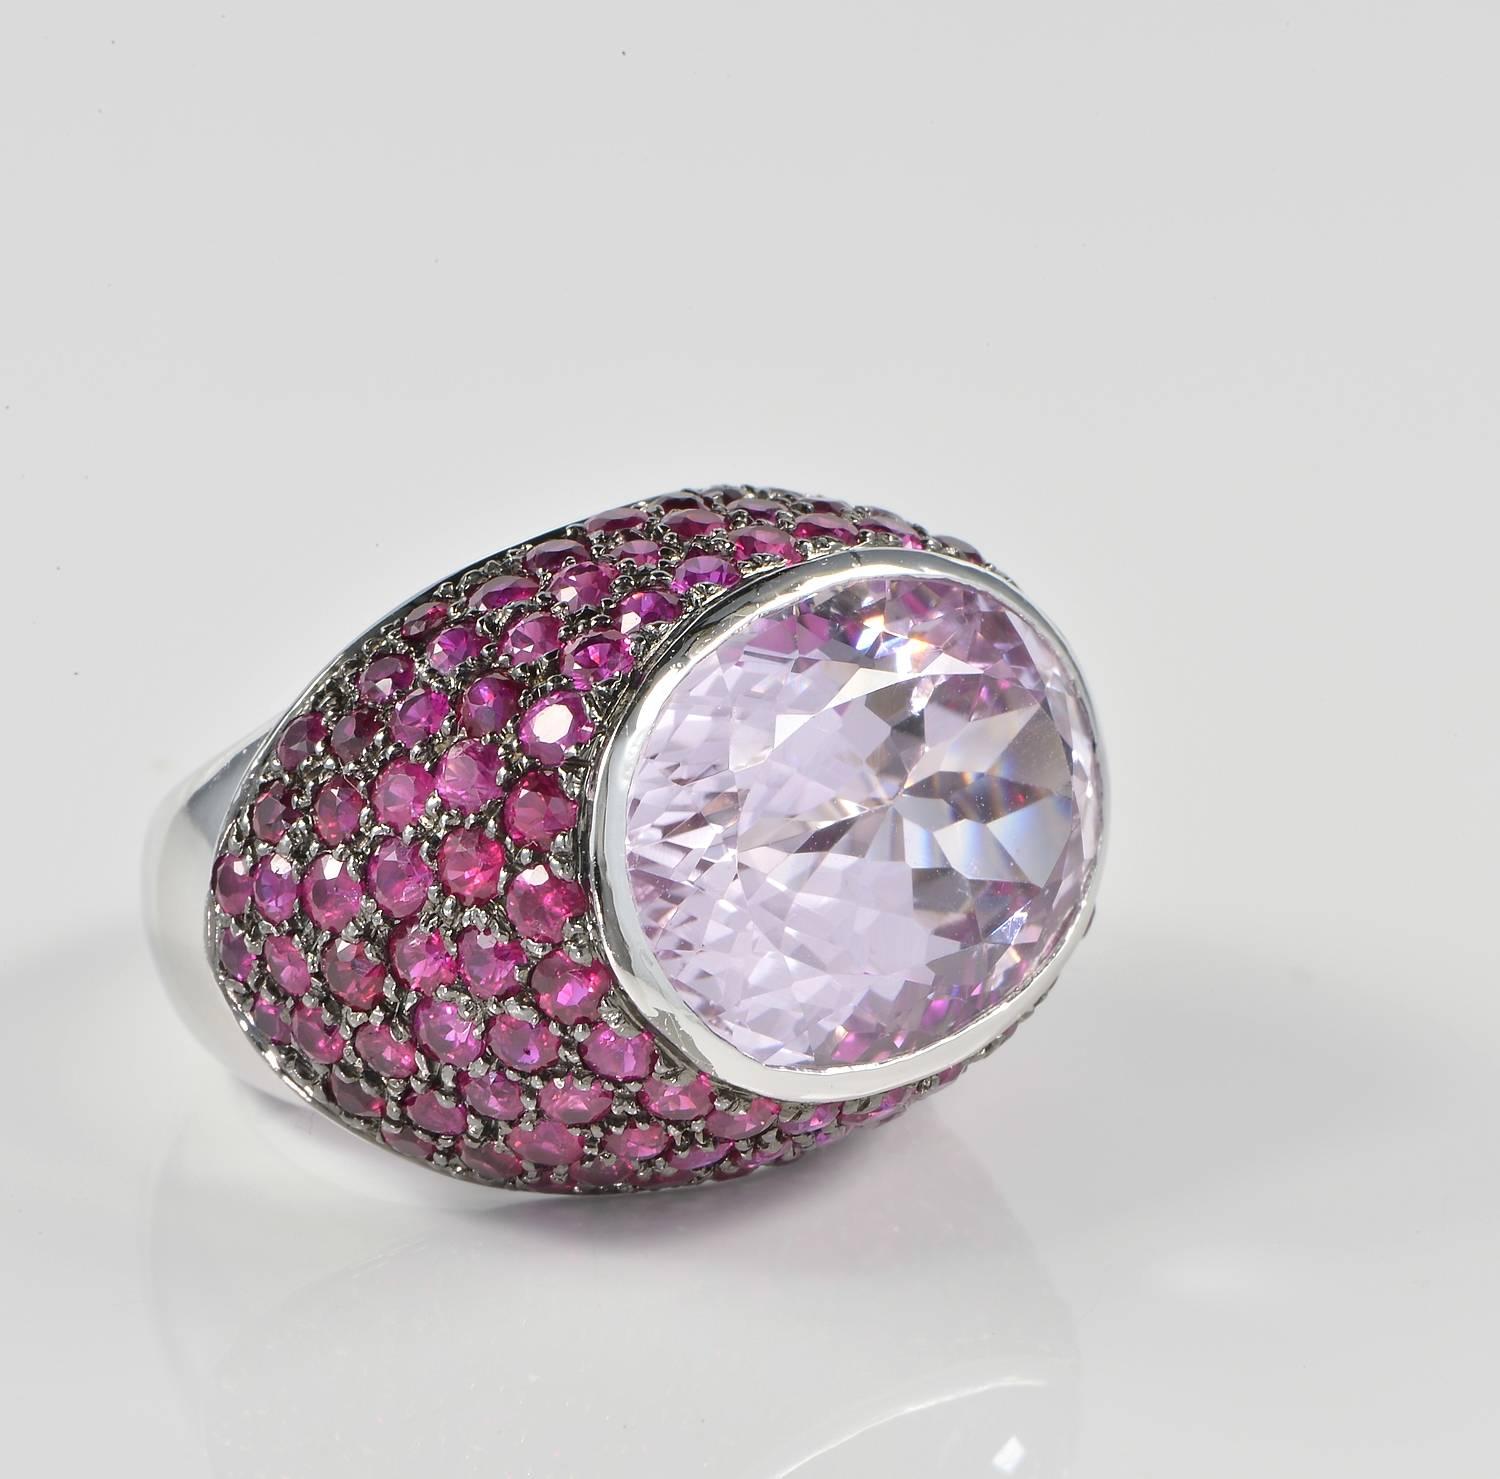 Outstanding Italian contemporary design hand crafted of solid 18 Kt white as individual piece of jewellery.
Set throughout with over 5.0 Ct of natural Rubies on blacked platinum.
The main gemstone is a striking large 18.0 Ct Natural Kunzite of